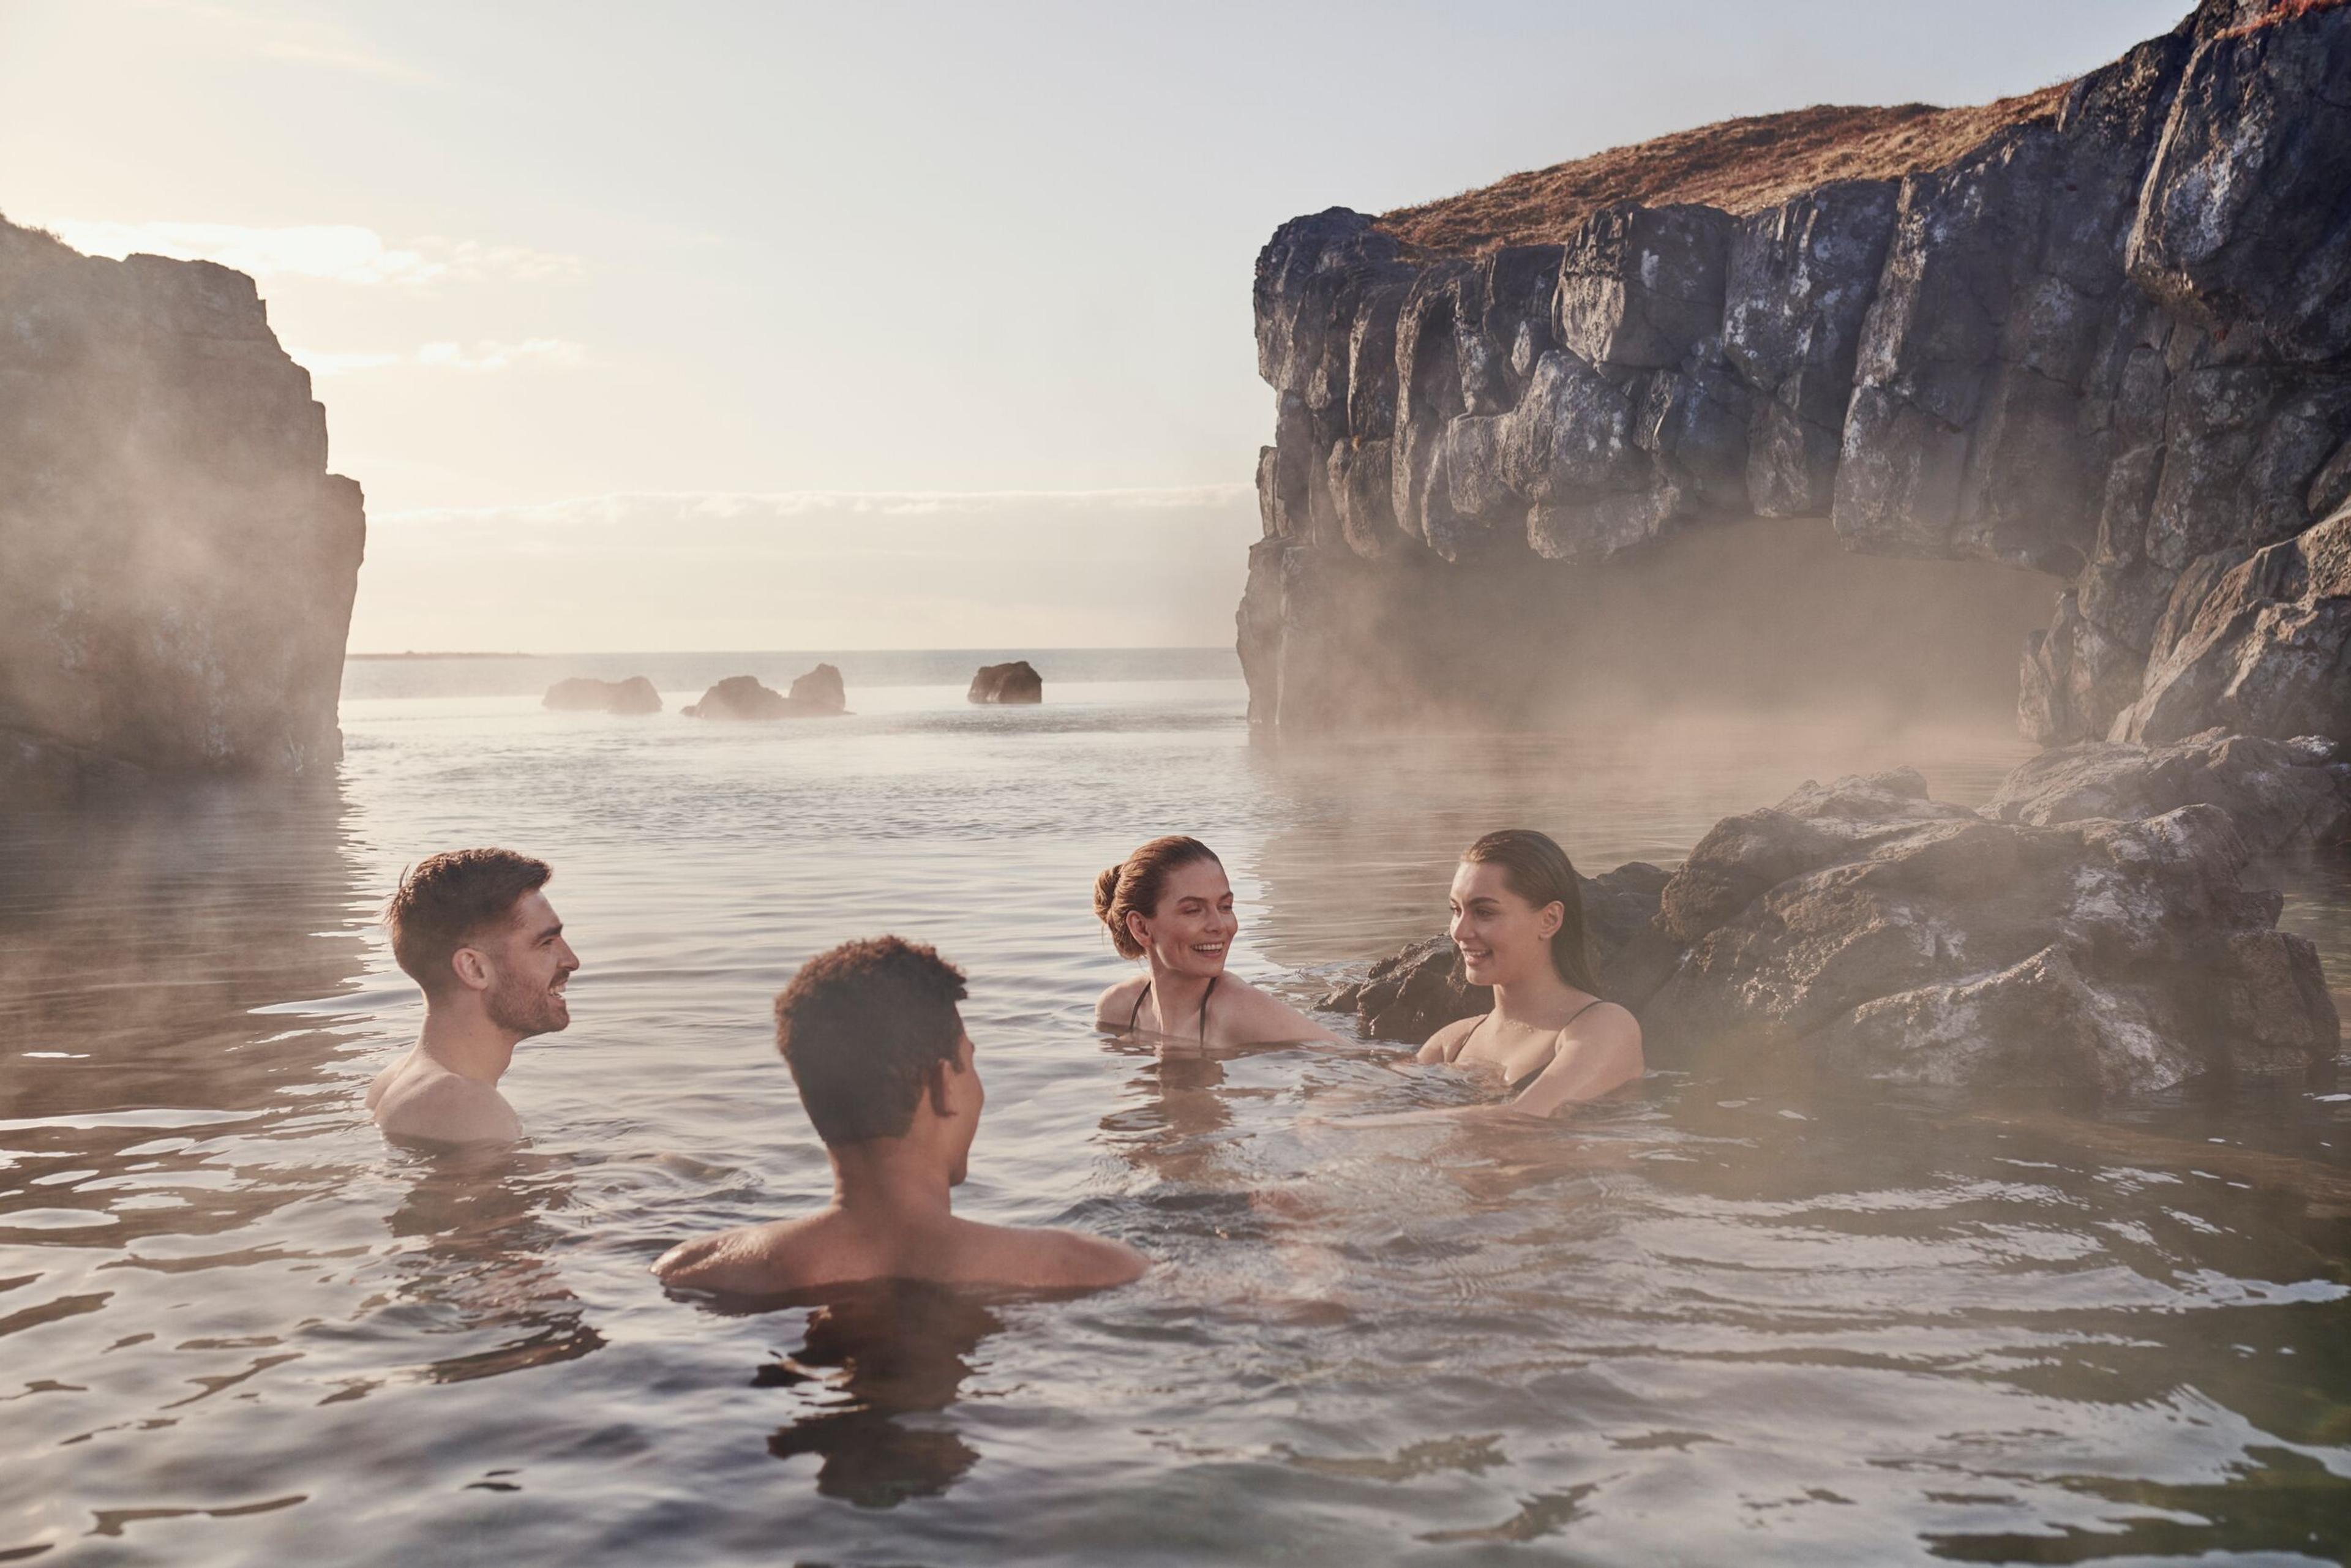 Visitors relax in the geothermal waters surrounded by rocks